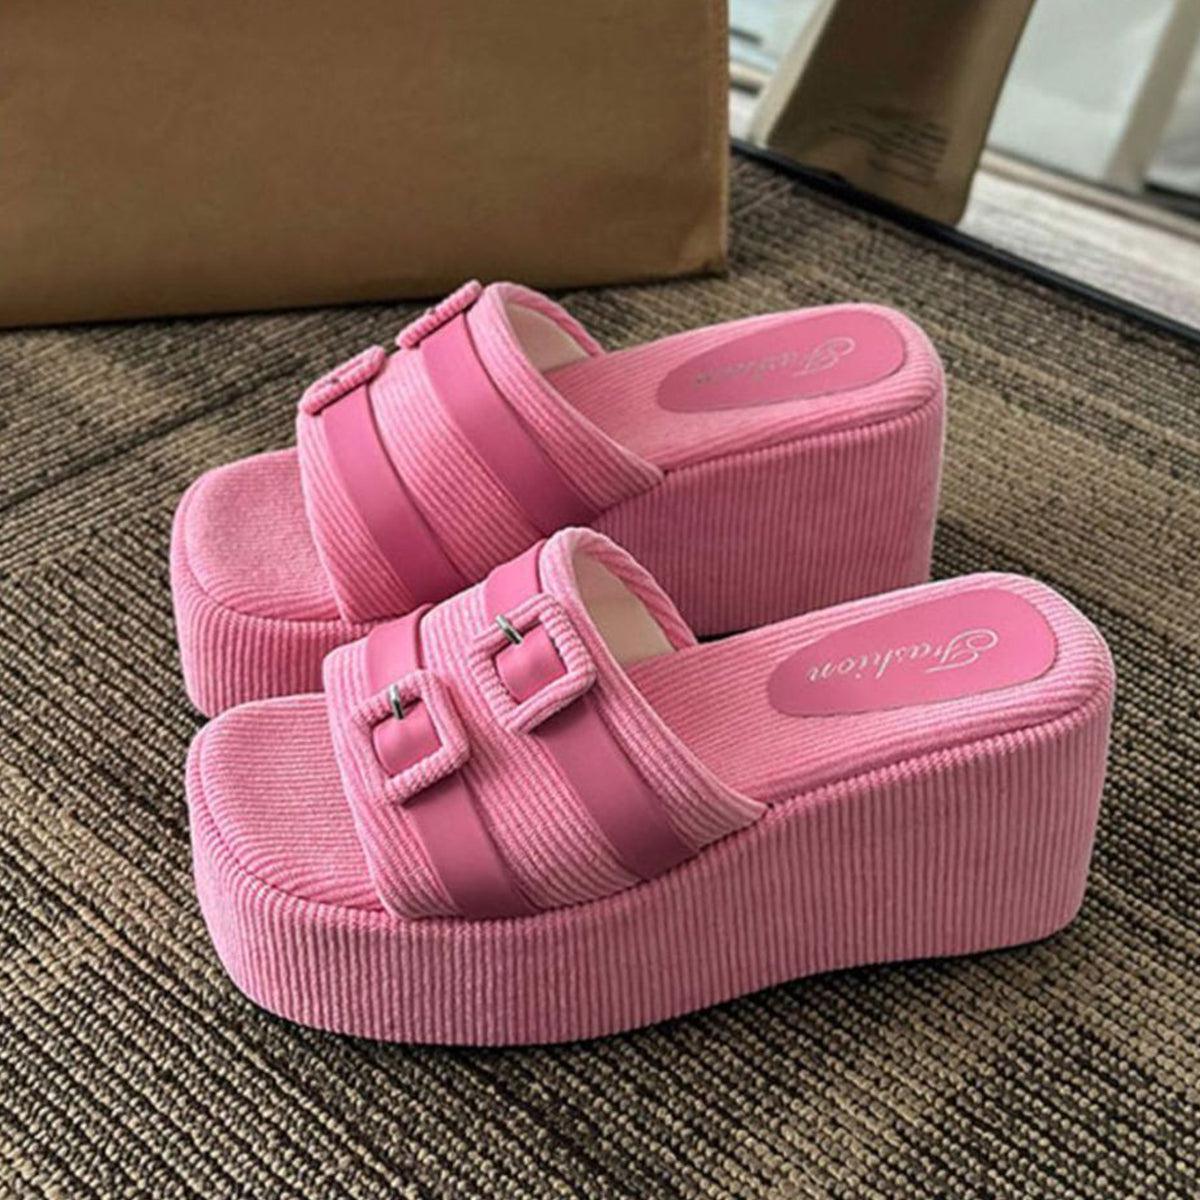 a pair of pink shoes sitting on top of a carpet